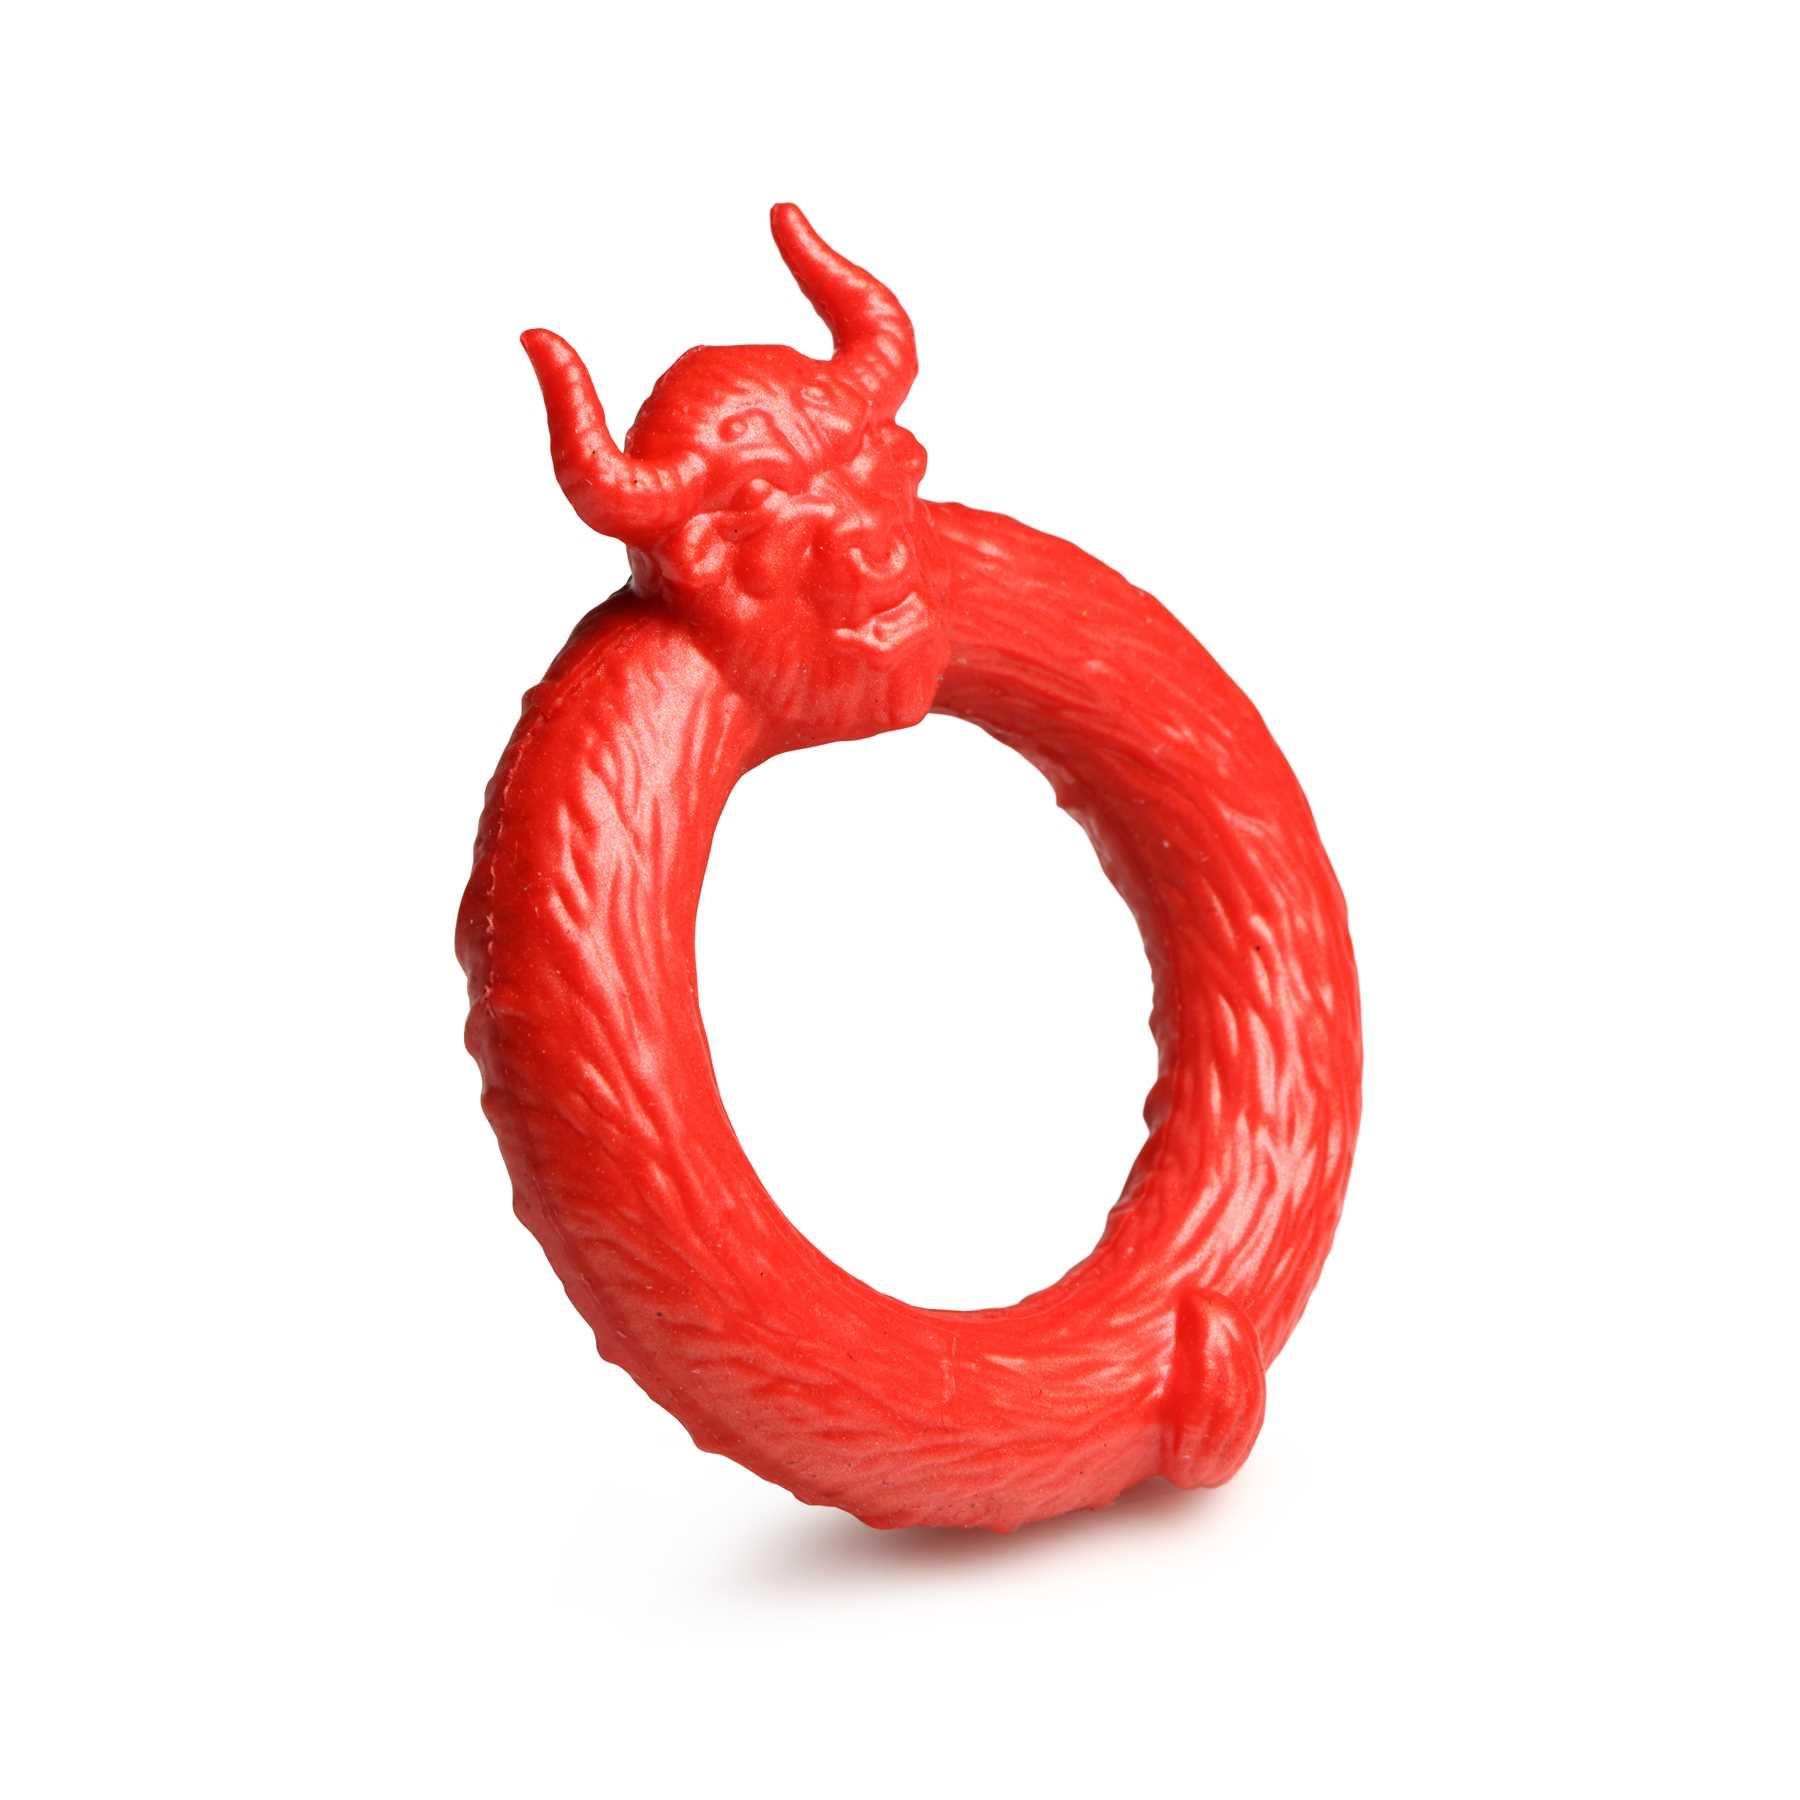 Creature Cocks Minotaur Silicone Cock Ring side view